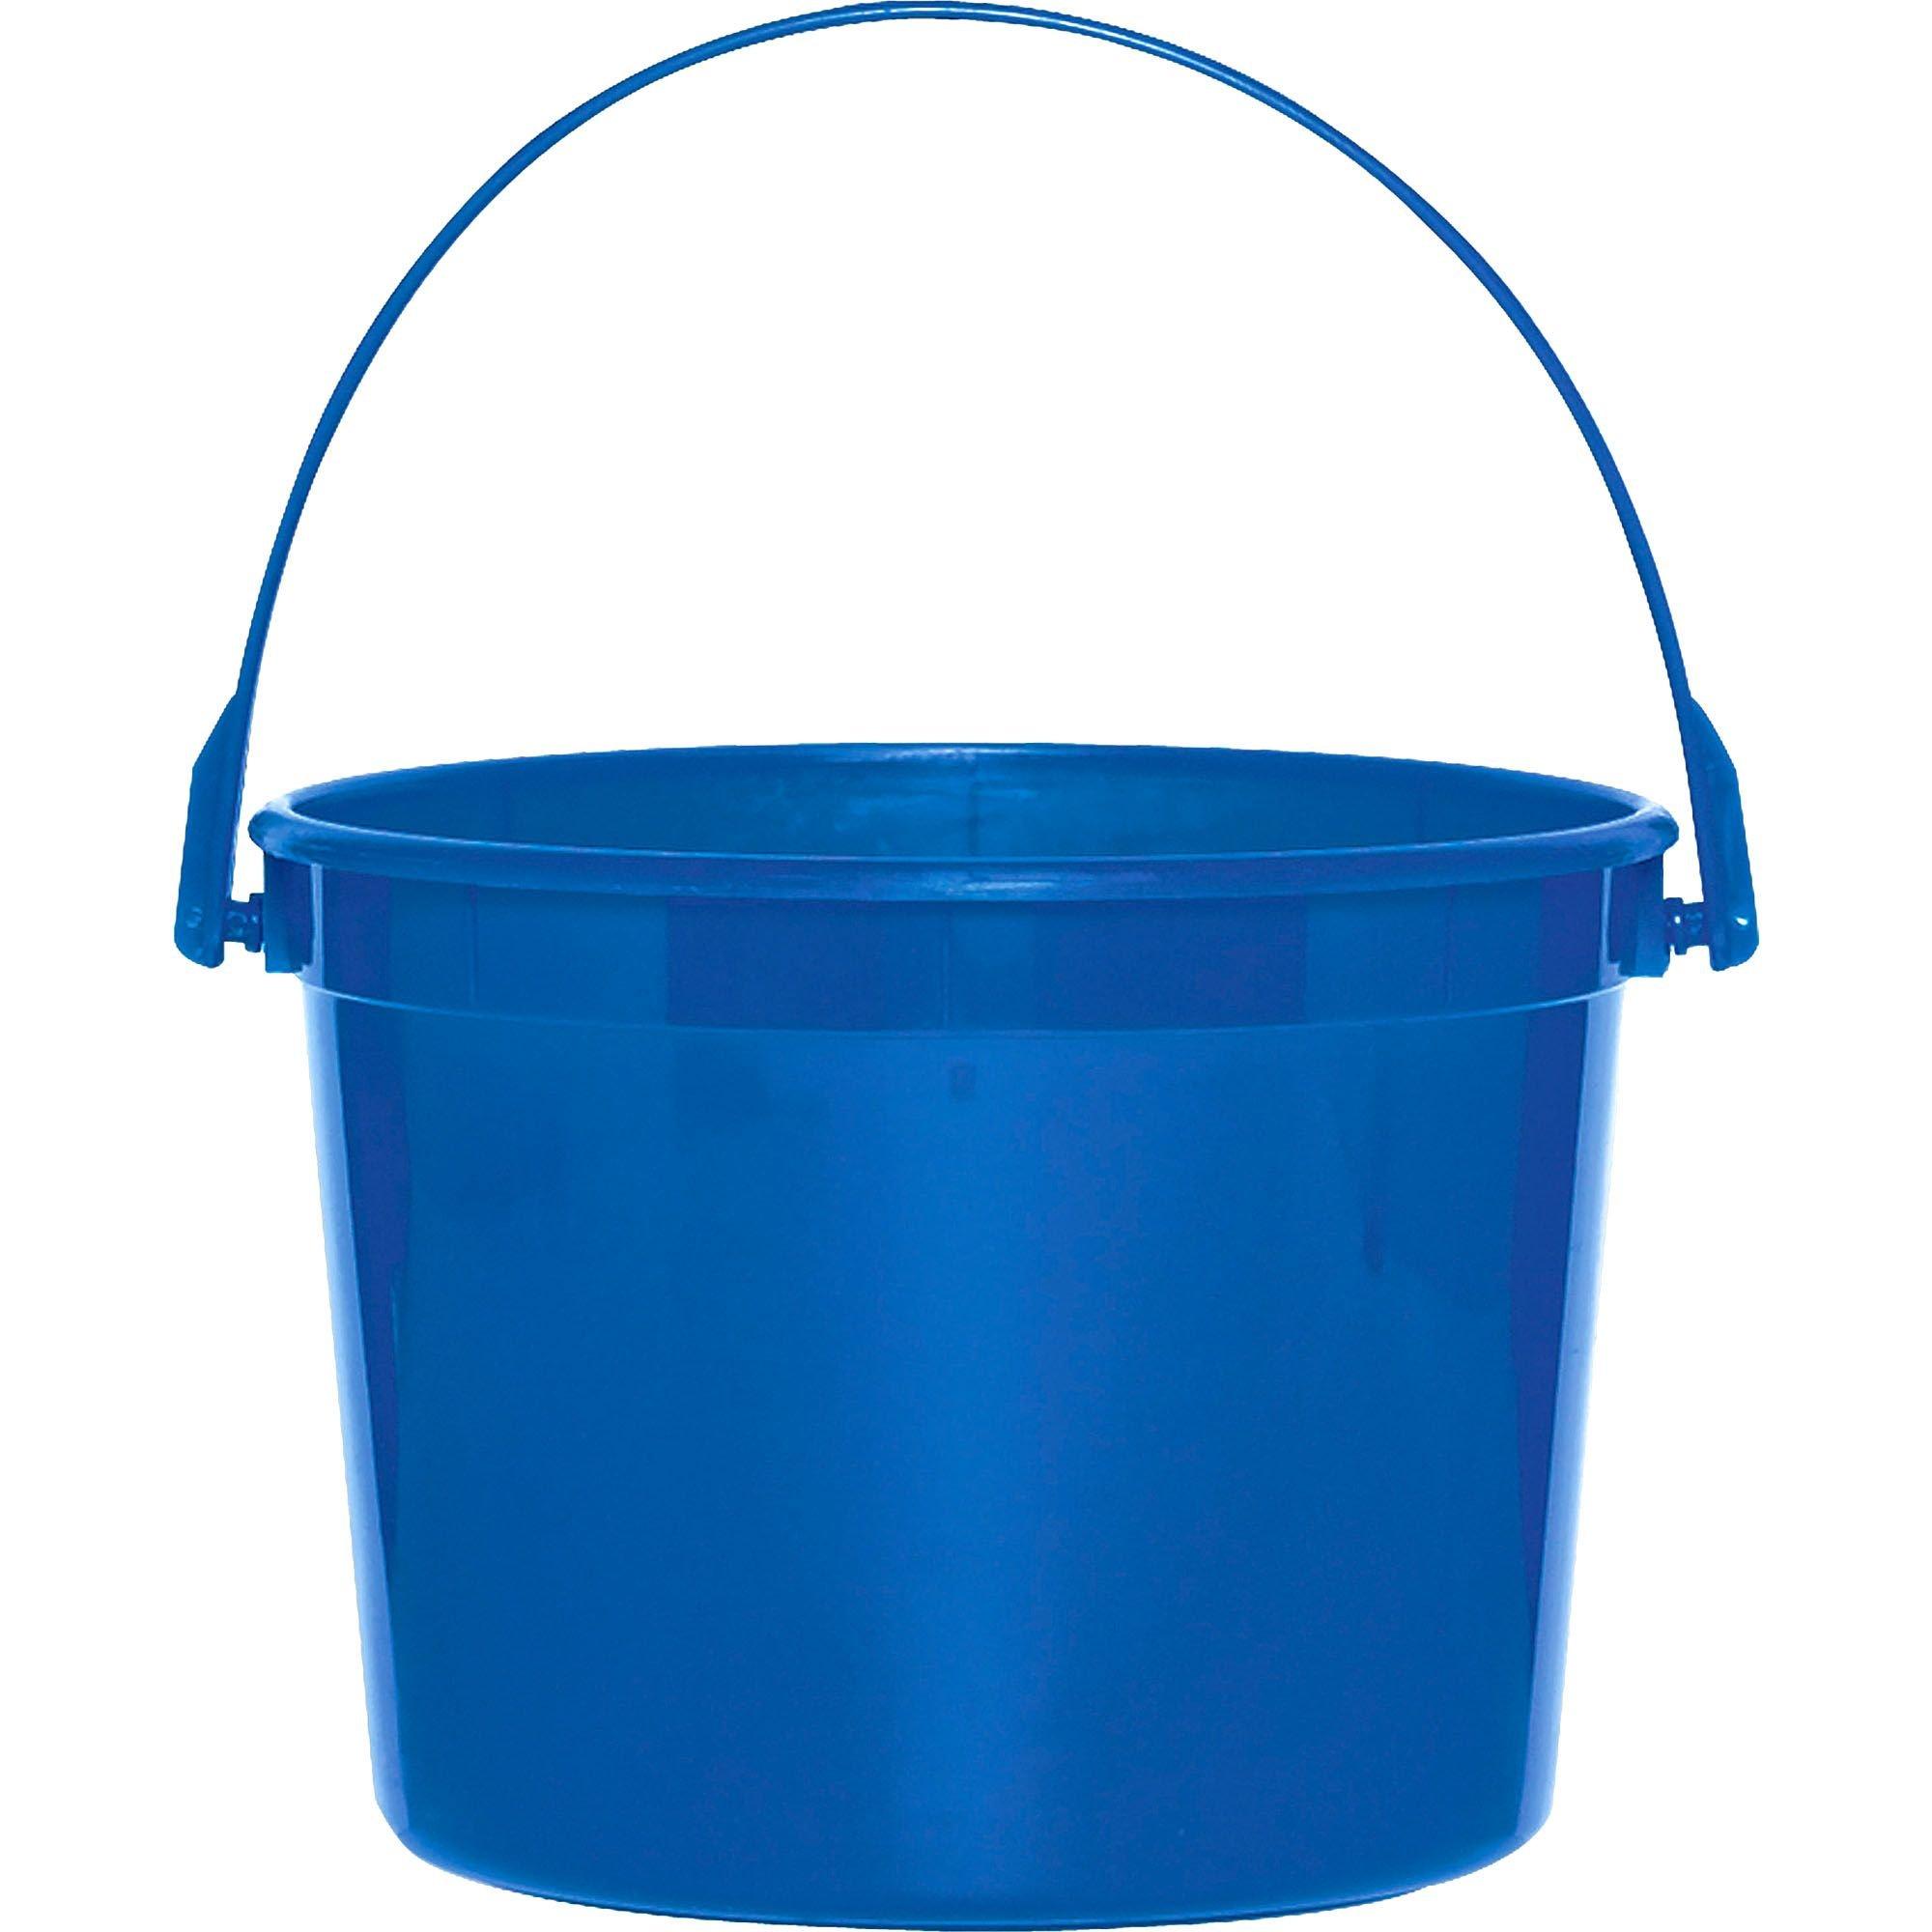 Introducing plastic bucket container + the best purchase price